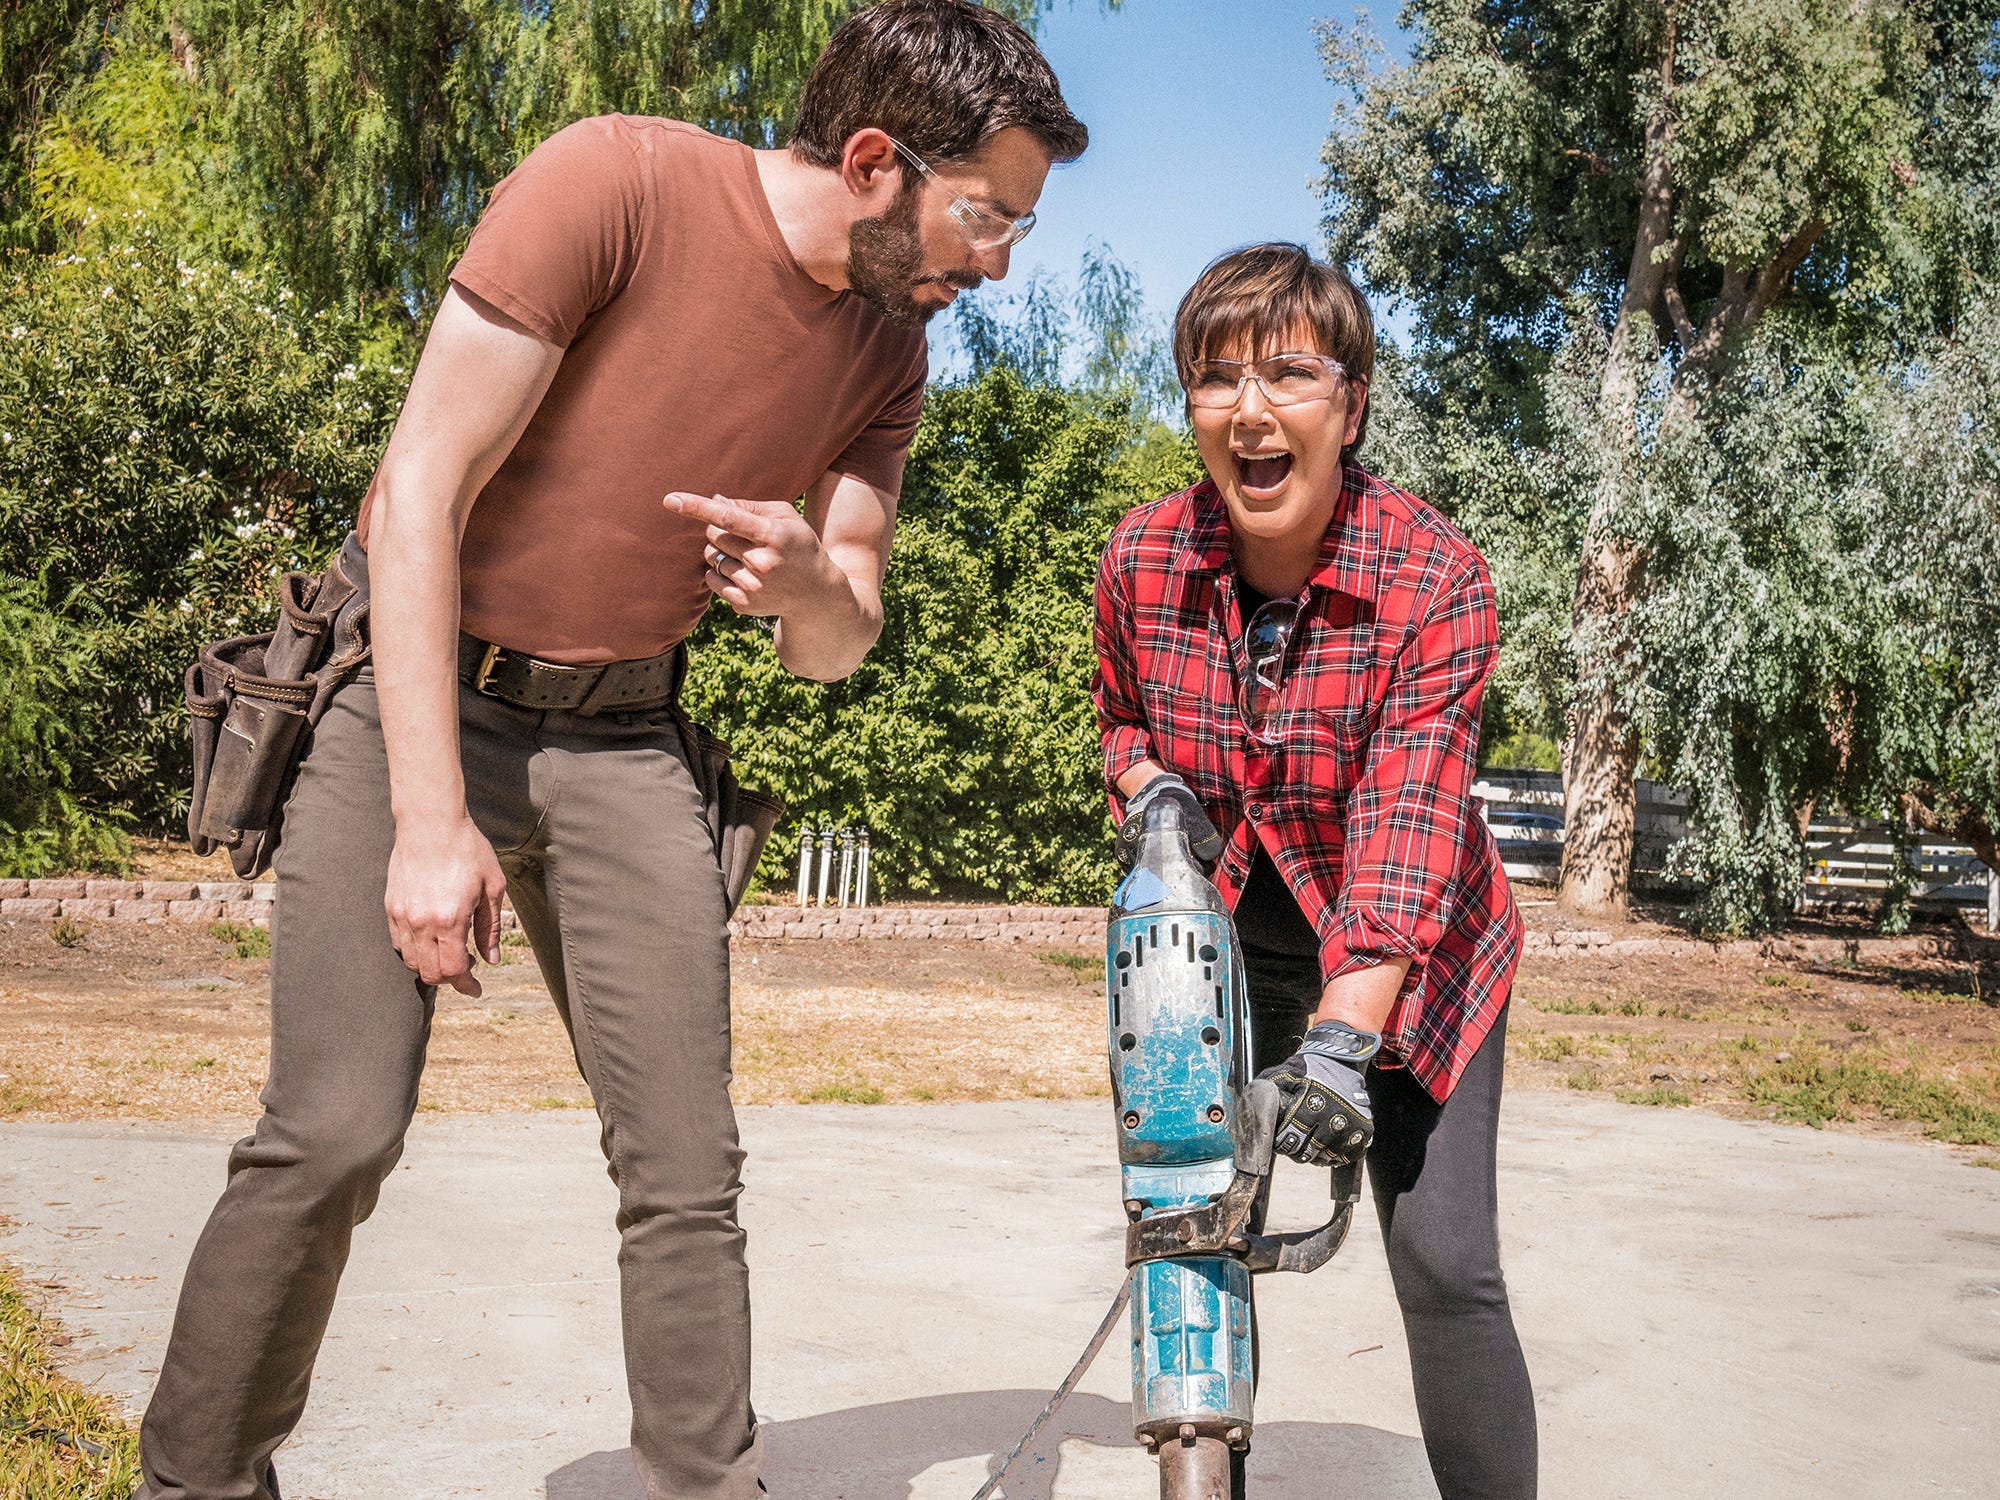 Kris Jenner uses a jackhammer while a Property Brother looks on.